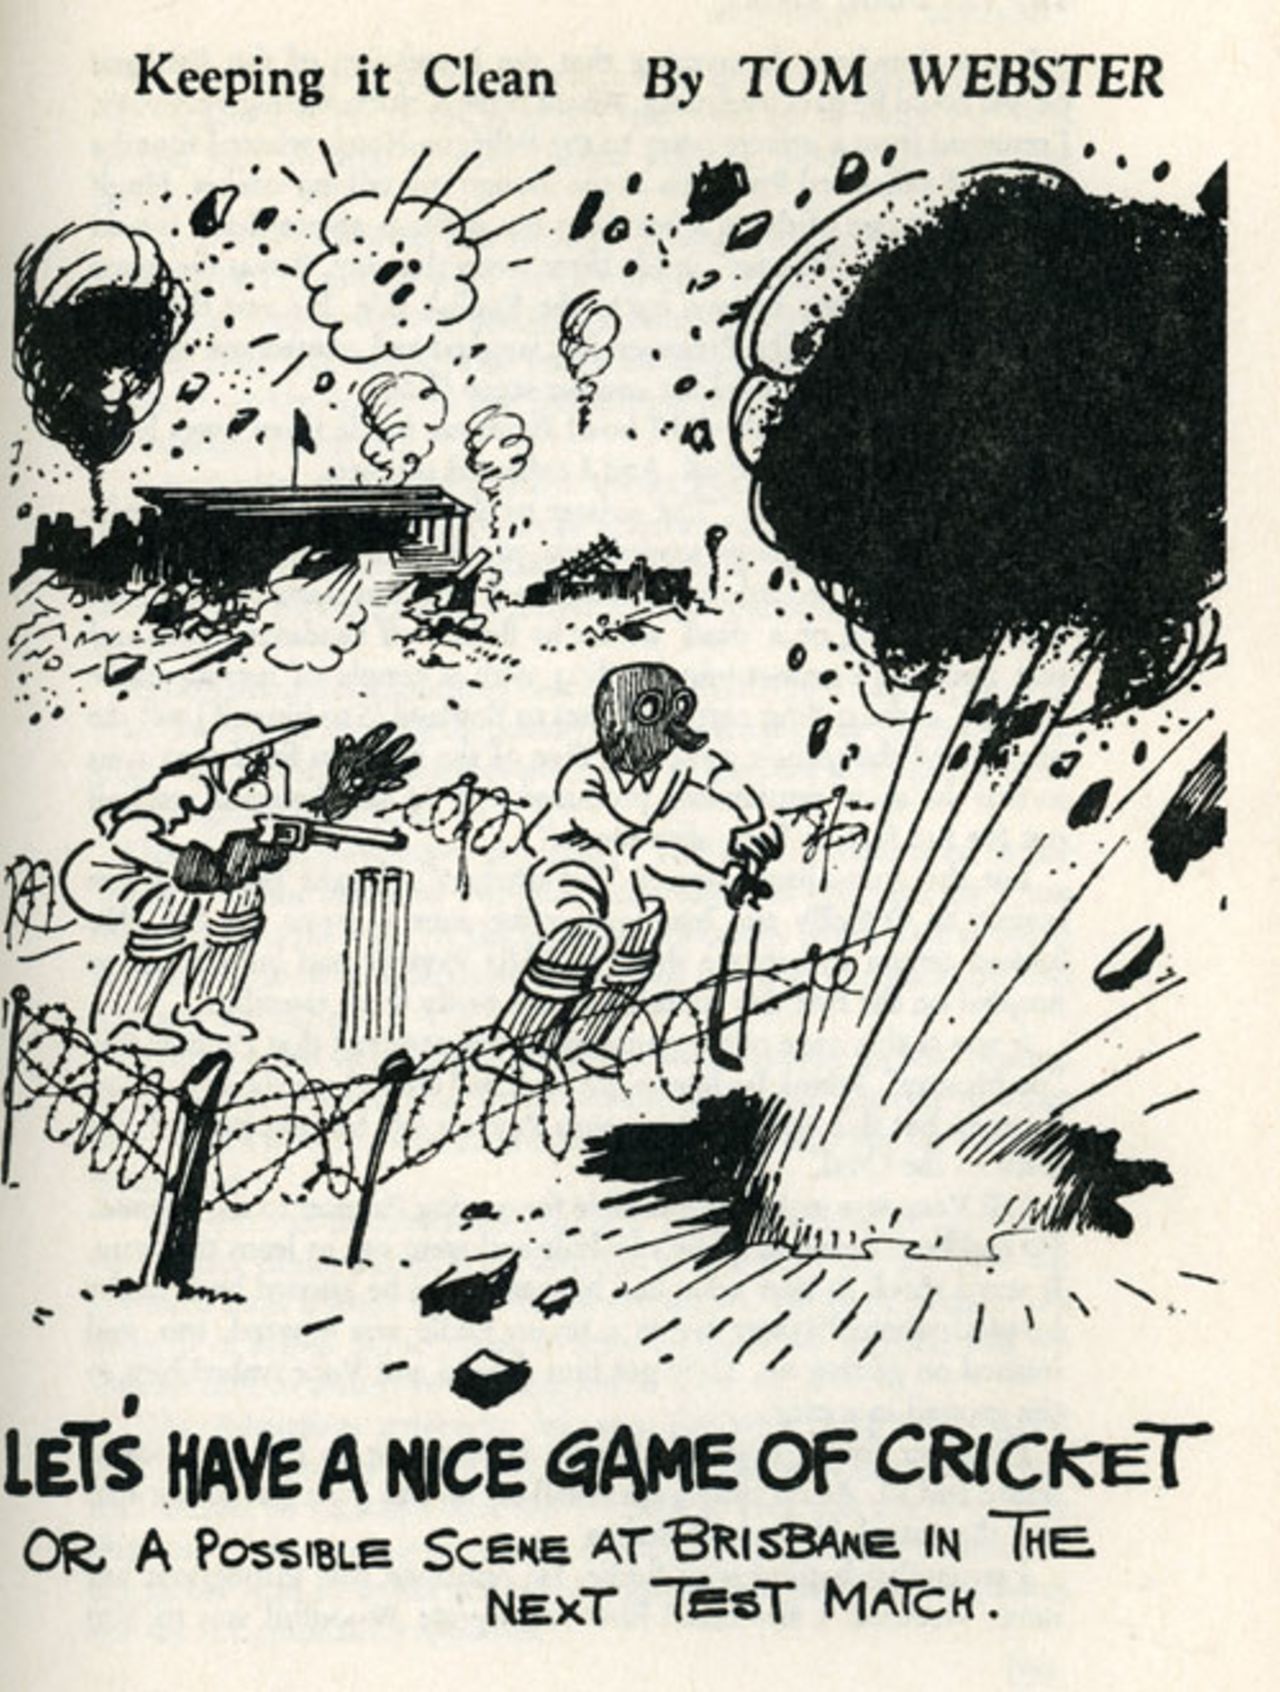 Tom Webster in <I>The Daily Express</I> with a view of Bodyline, Australia v England, 4th Test, Brisbane, February 6, 1933